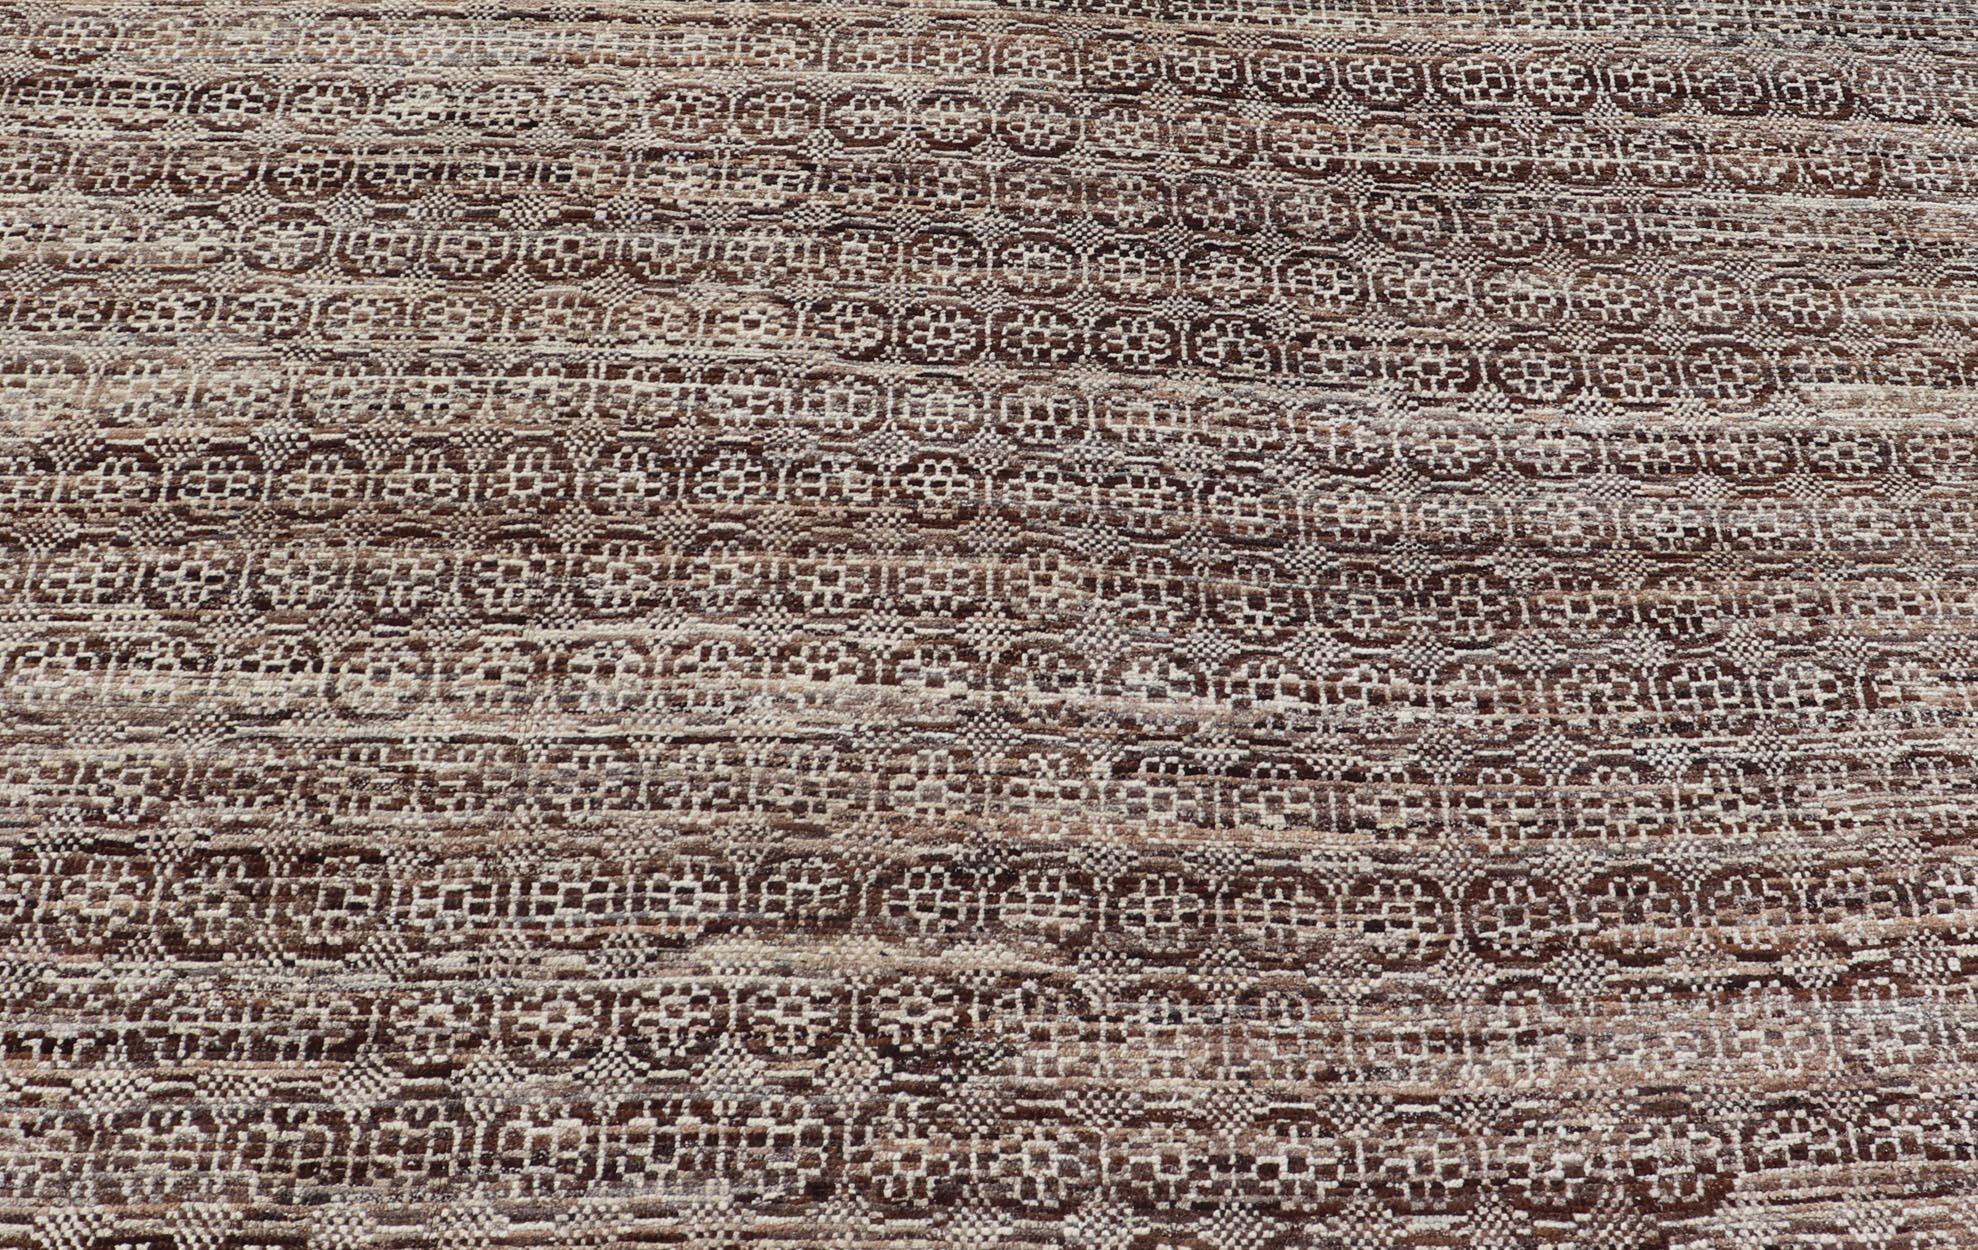 This modern casual Khotan rug has been hand-knotted. The rug features a modern all-over geometric design, rendered in brown and ivory; making this rug a superb fit for a variety of classic, modern, casual and minimalist interiors.

Modern Casual